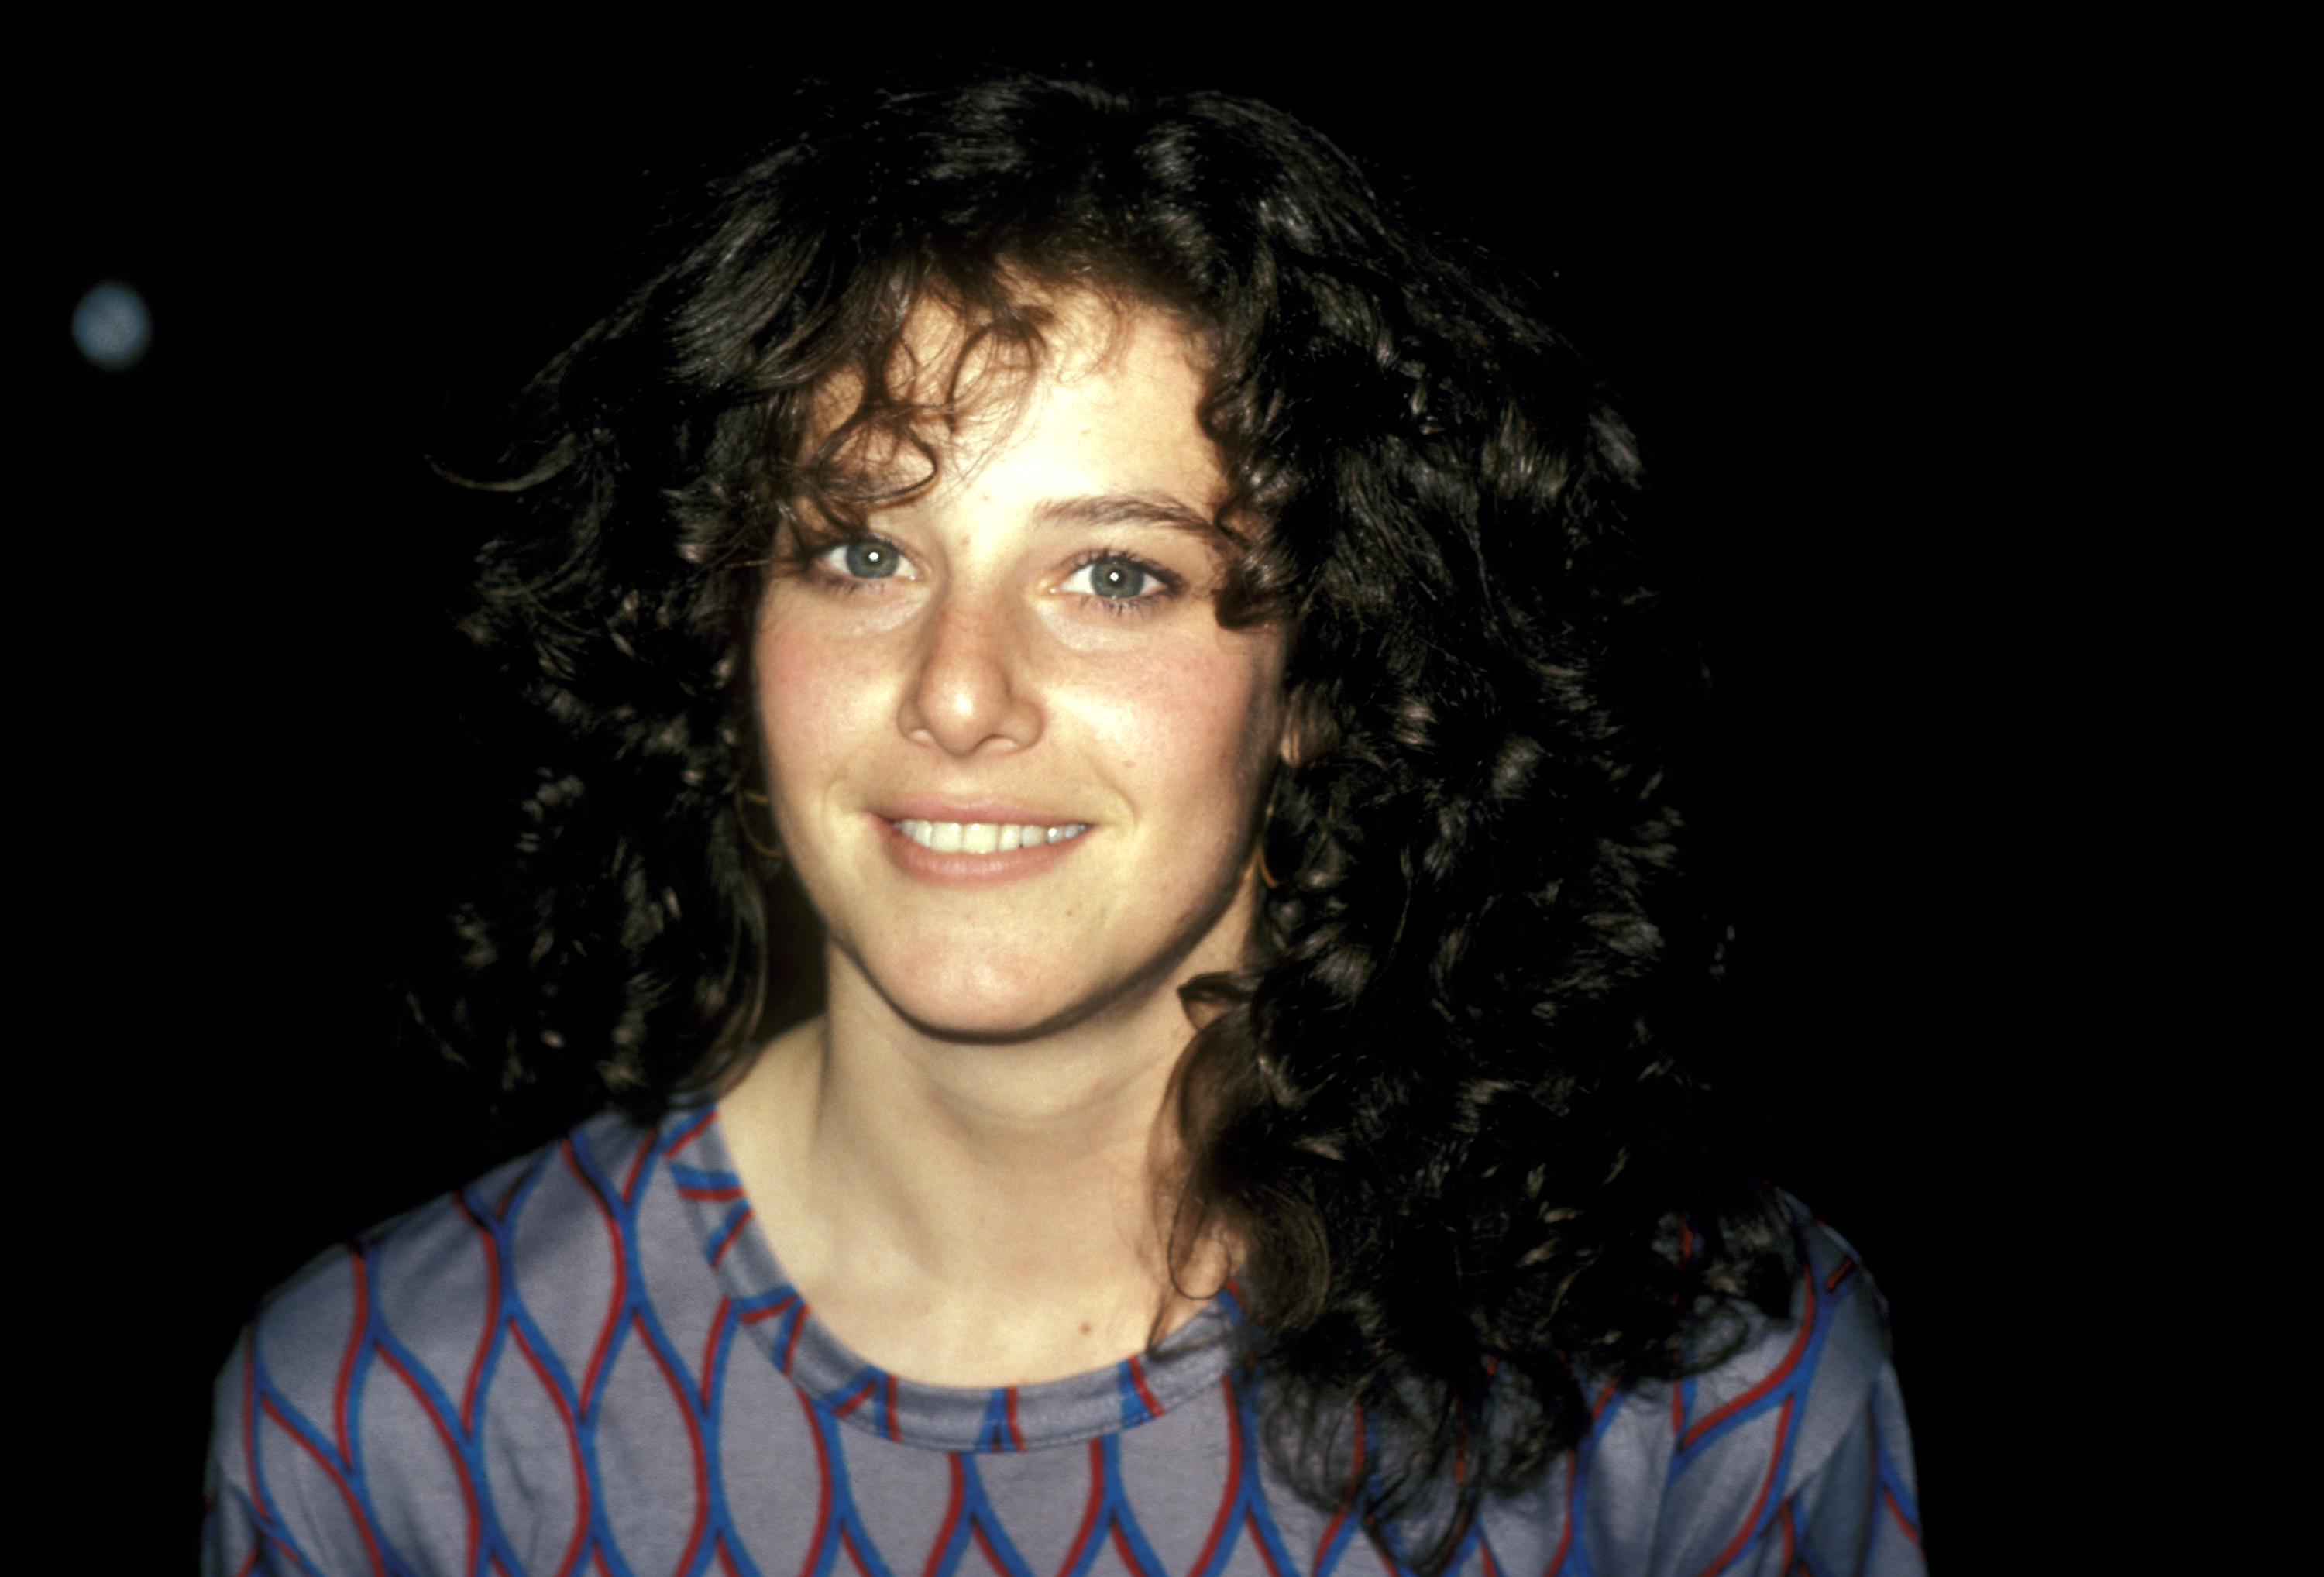 Debra Winger during "Cannery Row" wrap party at MGM Studios on March 21, 1981 in Culver City, California. | Source: Getty Images